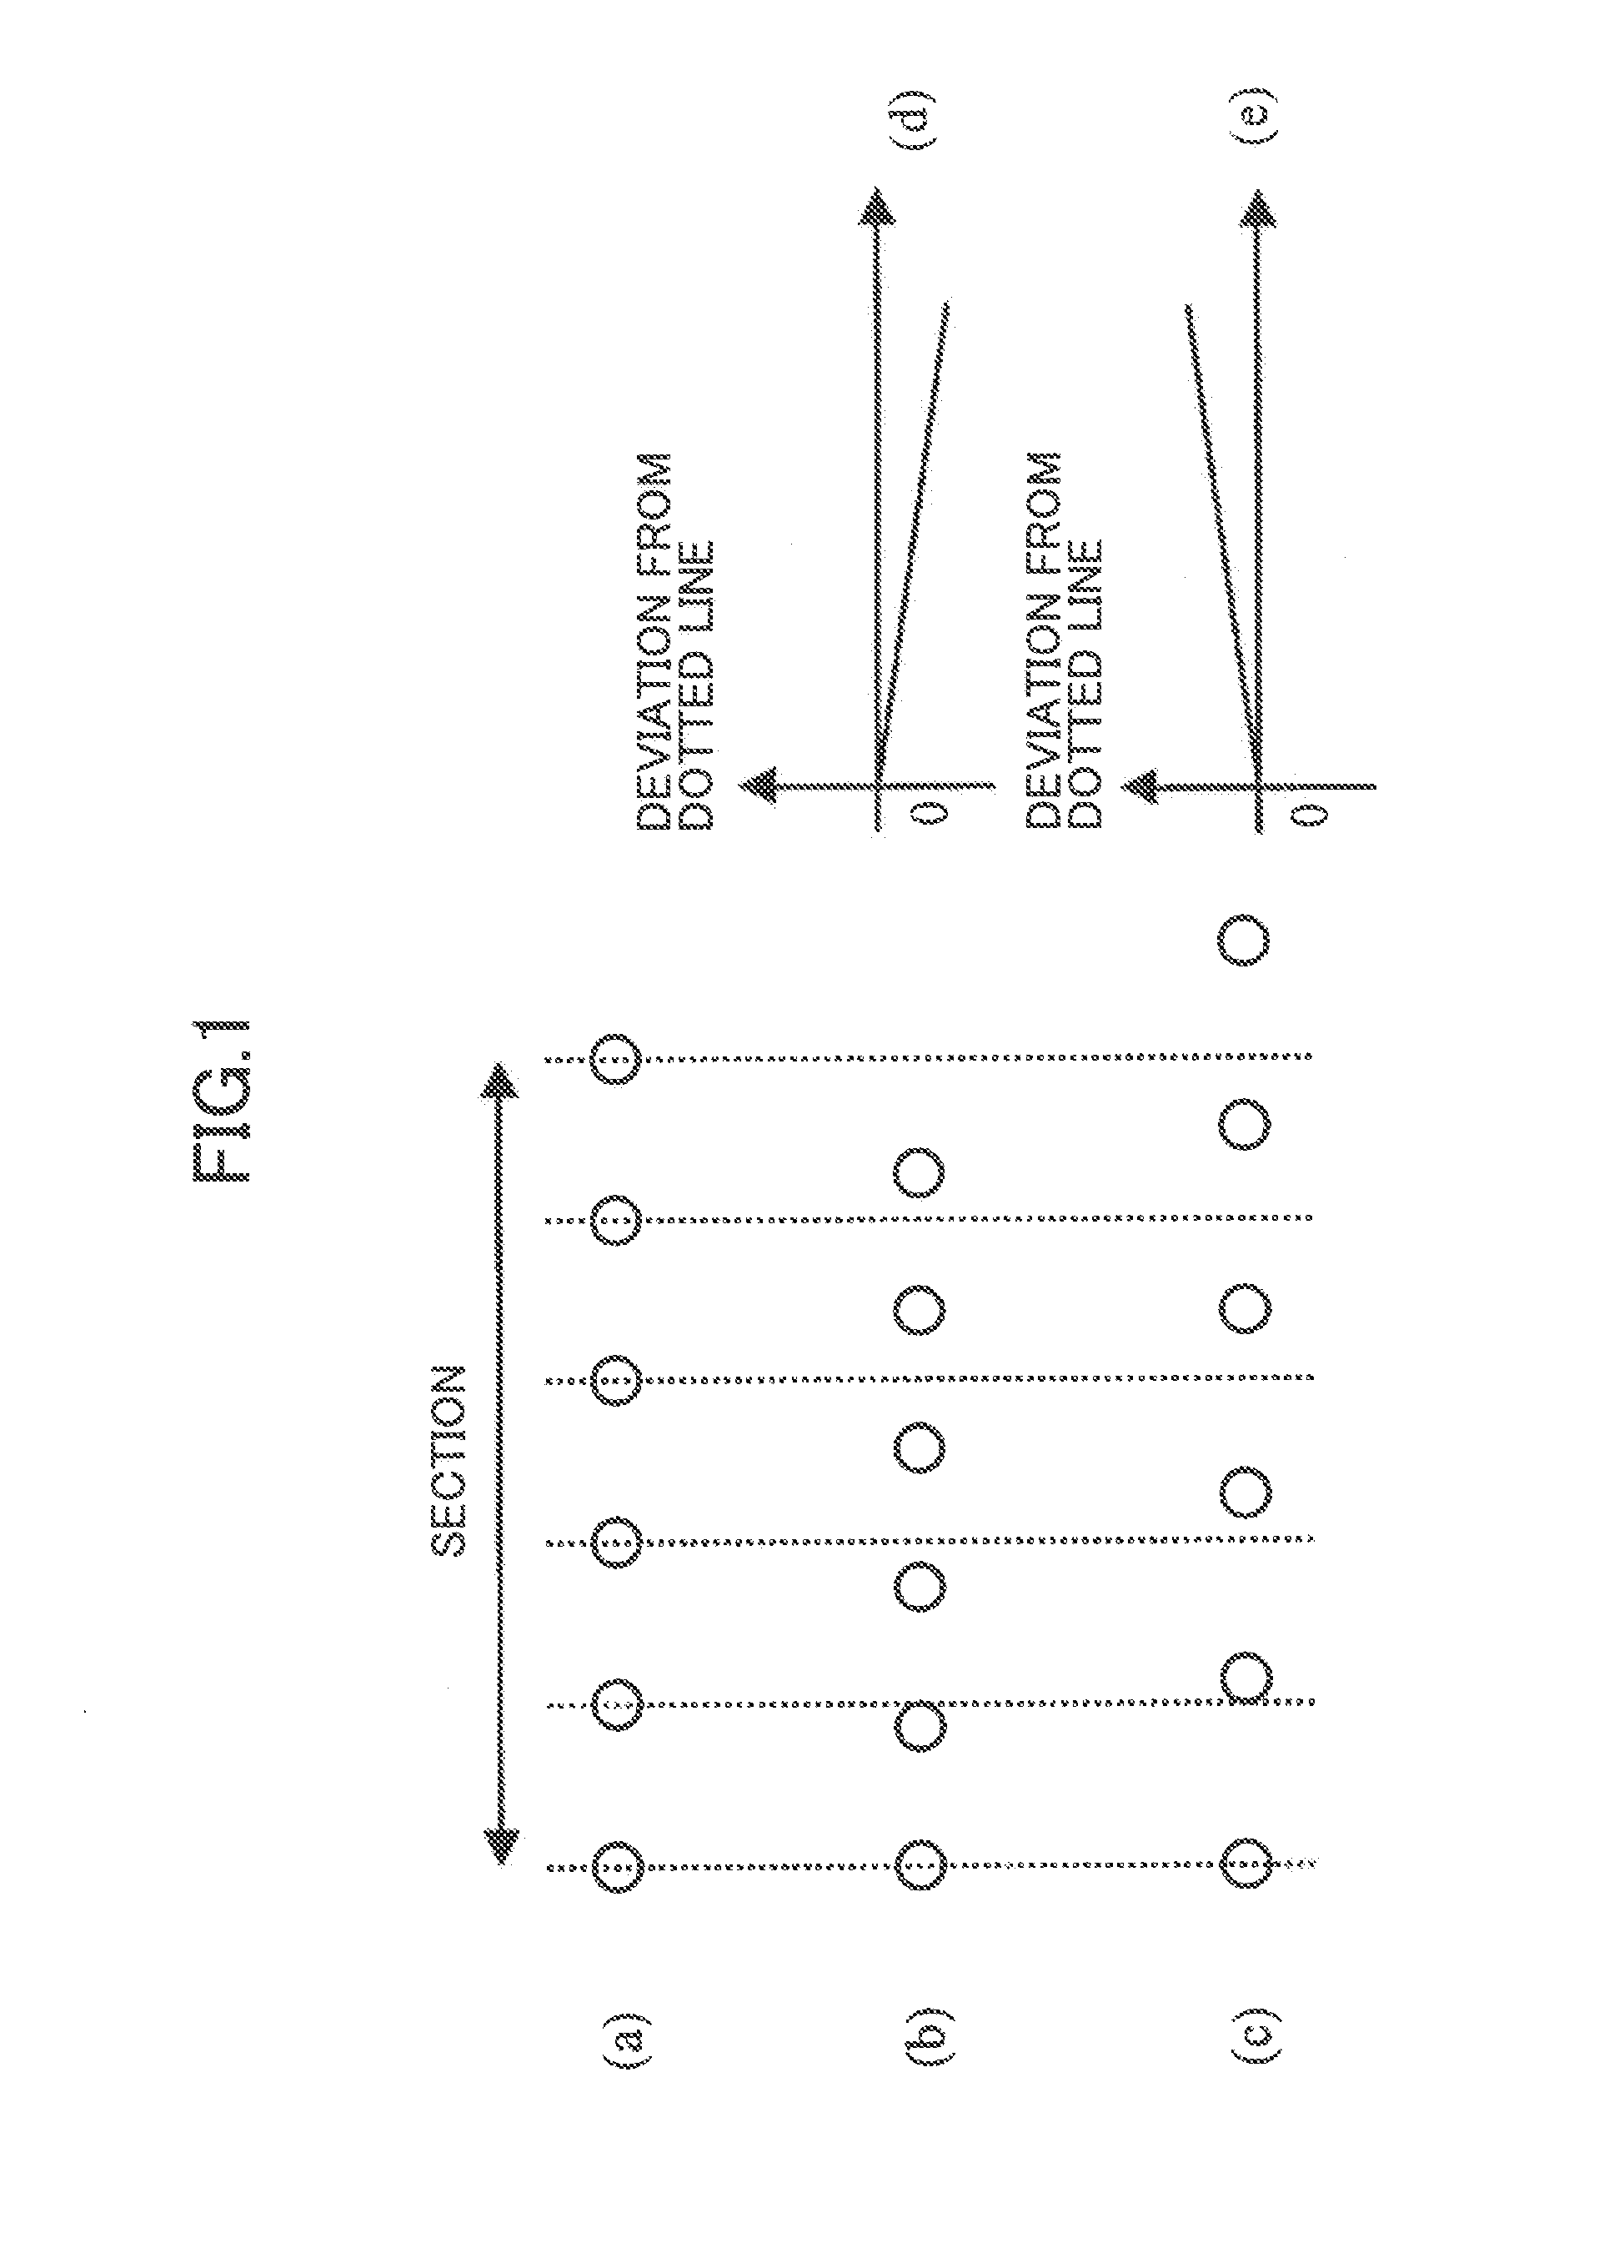 Beam-spot position compensation method, optical scanning device, and multi-color image forming device